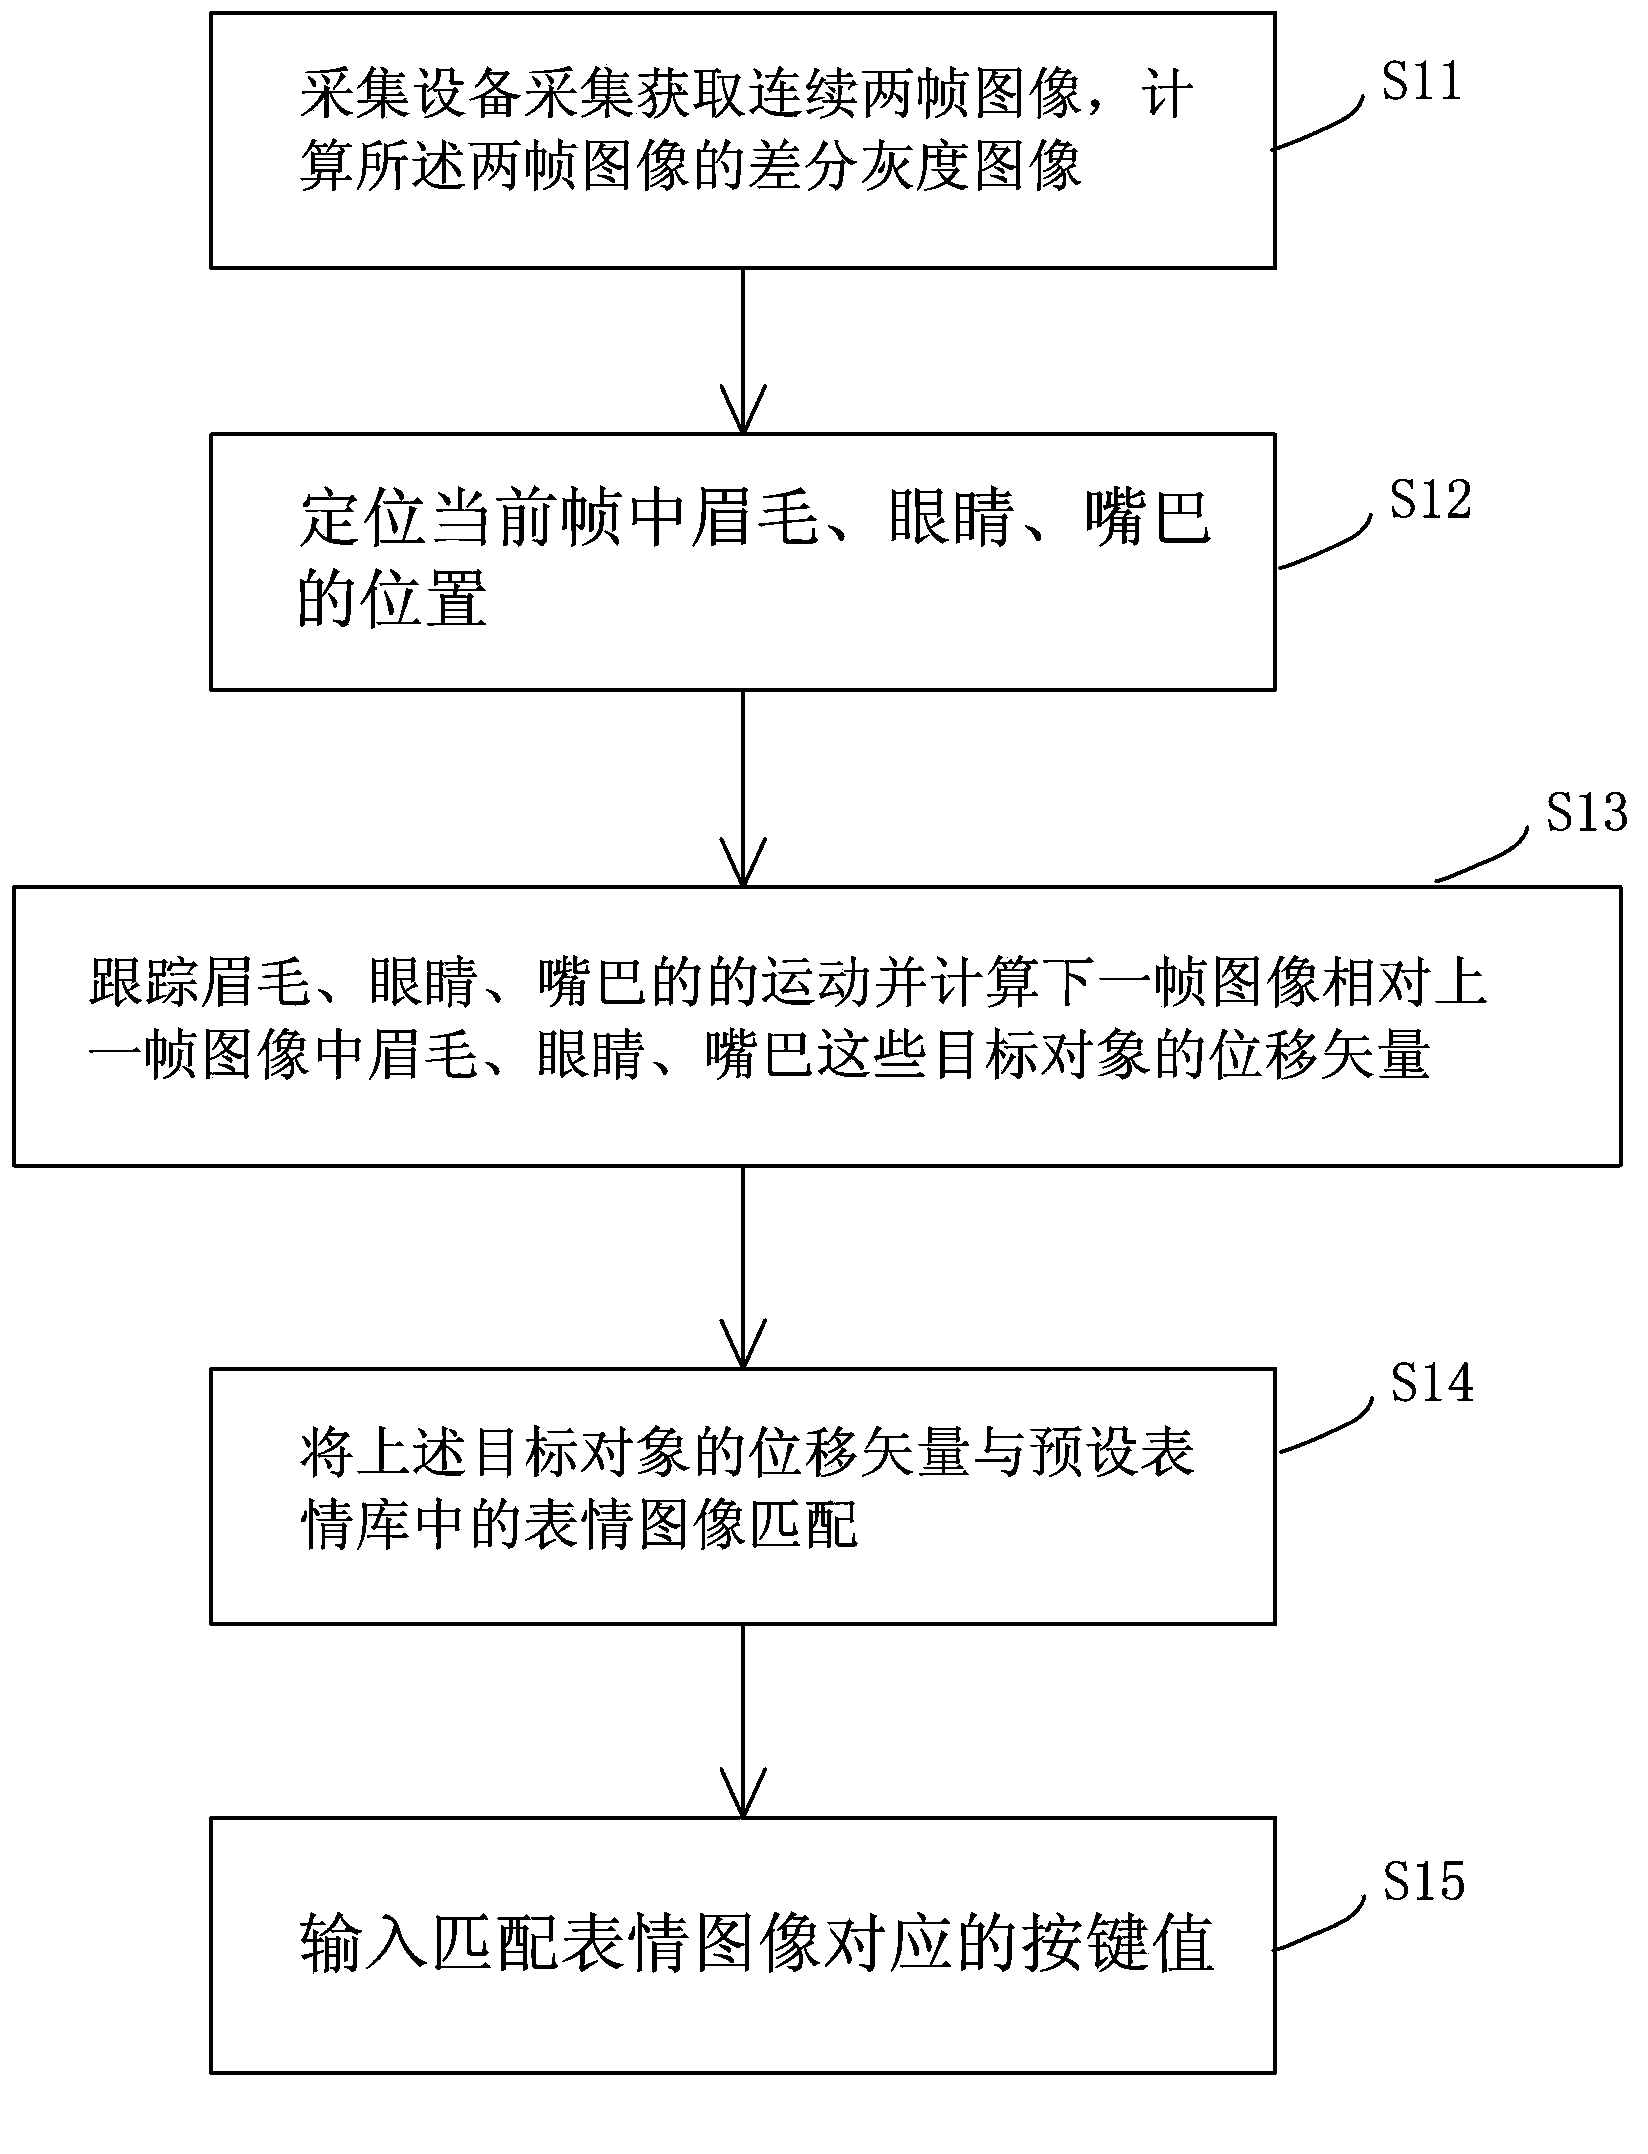 Facial expression recognition input method